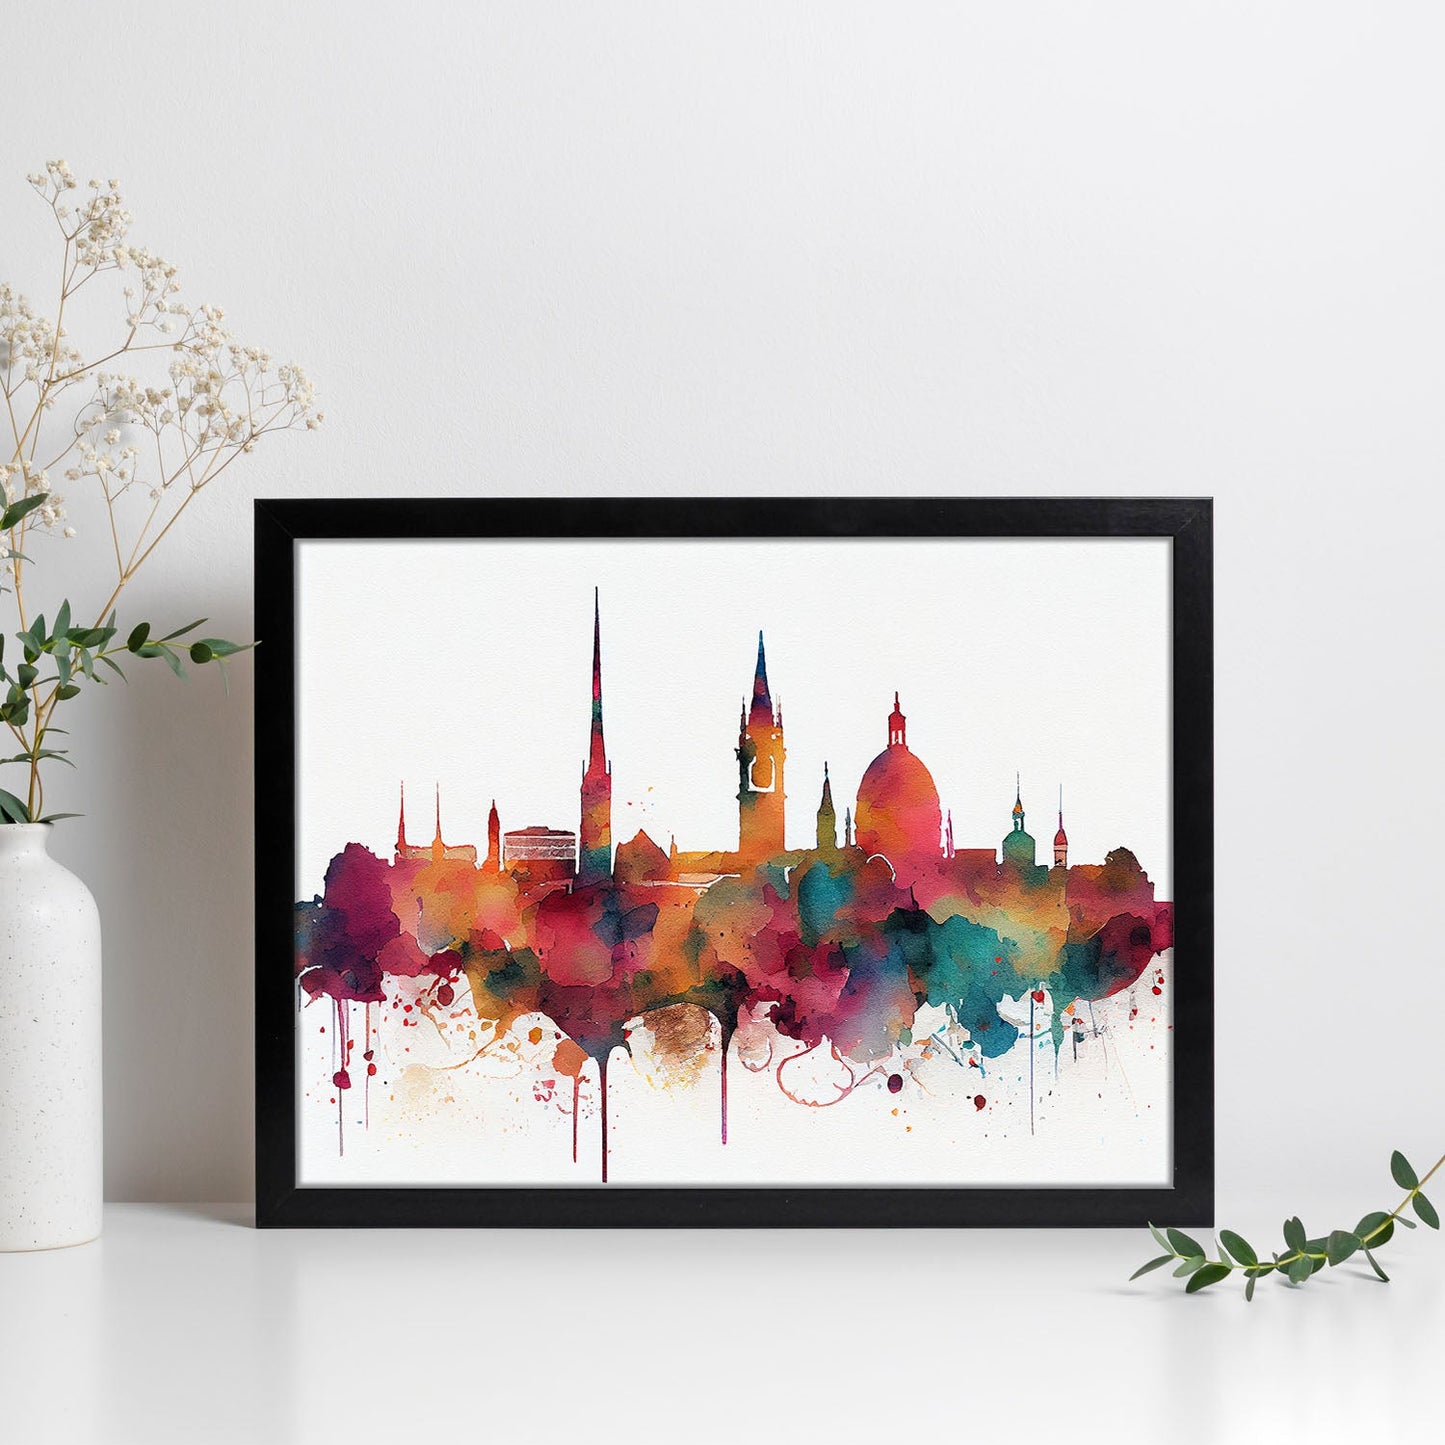 Nacnic watercolor of a skyline of the city of Stuttgart. Aesthetic Wall Art Prints for Bedroom or Living Room Design.-Artwork-Nacnic-A4-Sin Marco-Nacnic Estudio SL